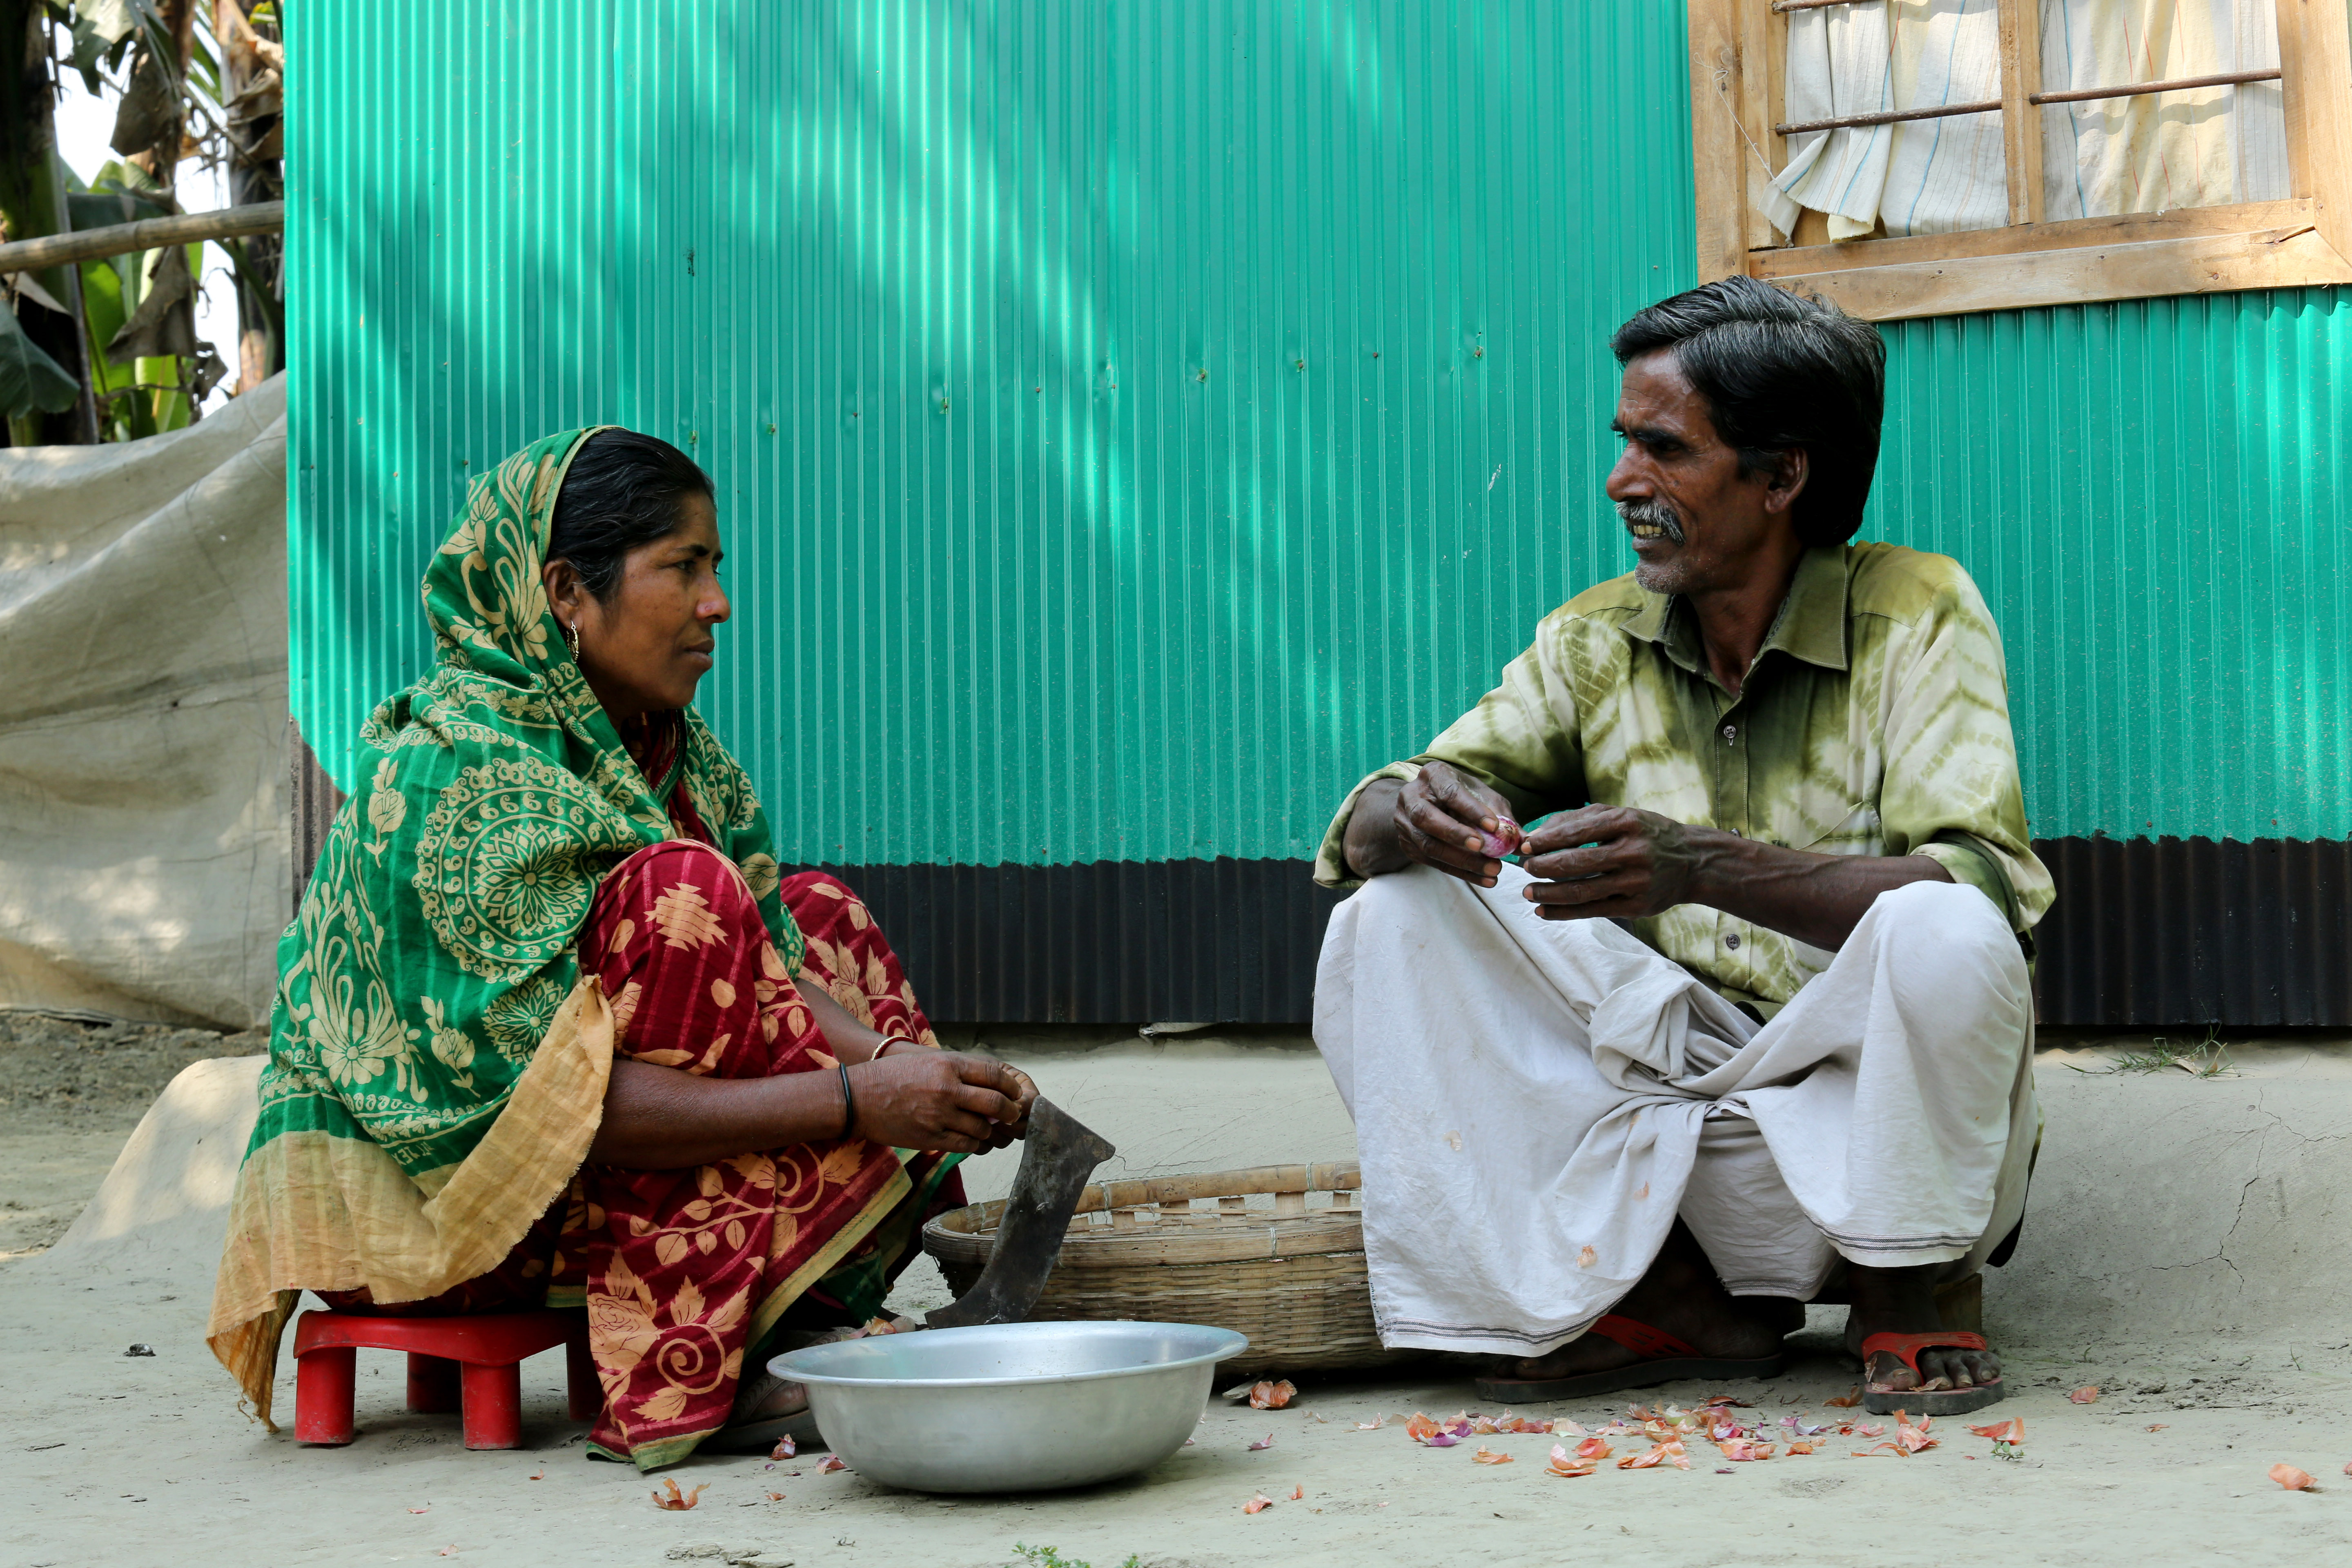 Picture of Fulchan (right) wearing white trousers and green shirt, and Joynab (left) wearing a green sari.  They are pictured sat outside their house in Bangladesh.